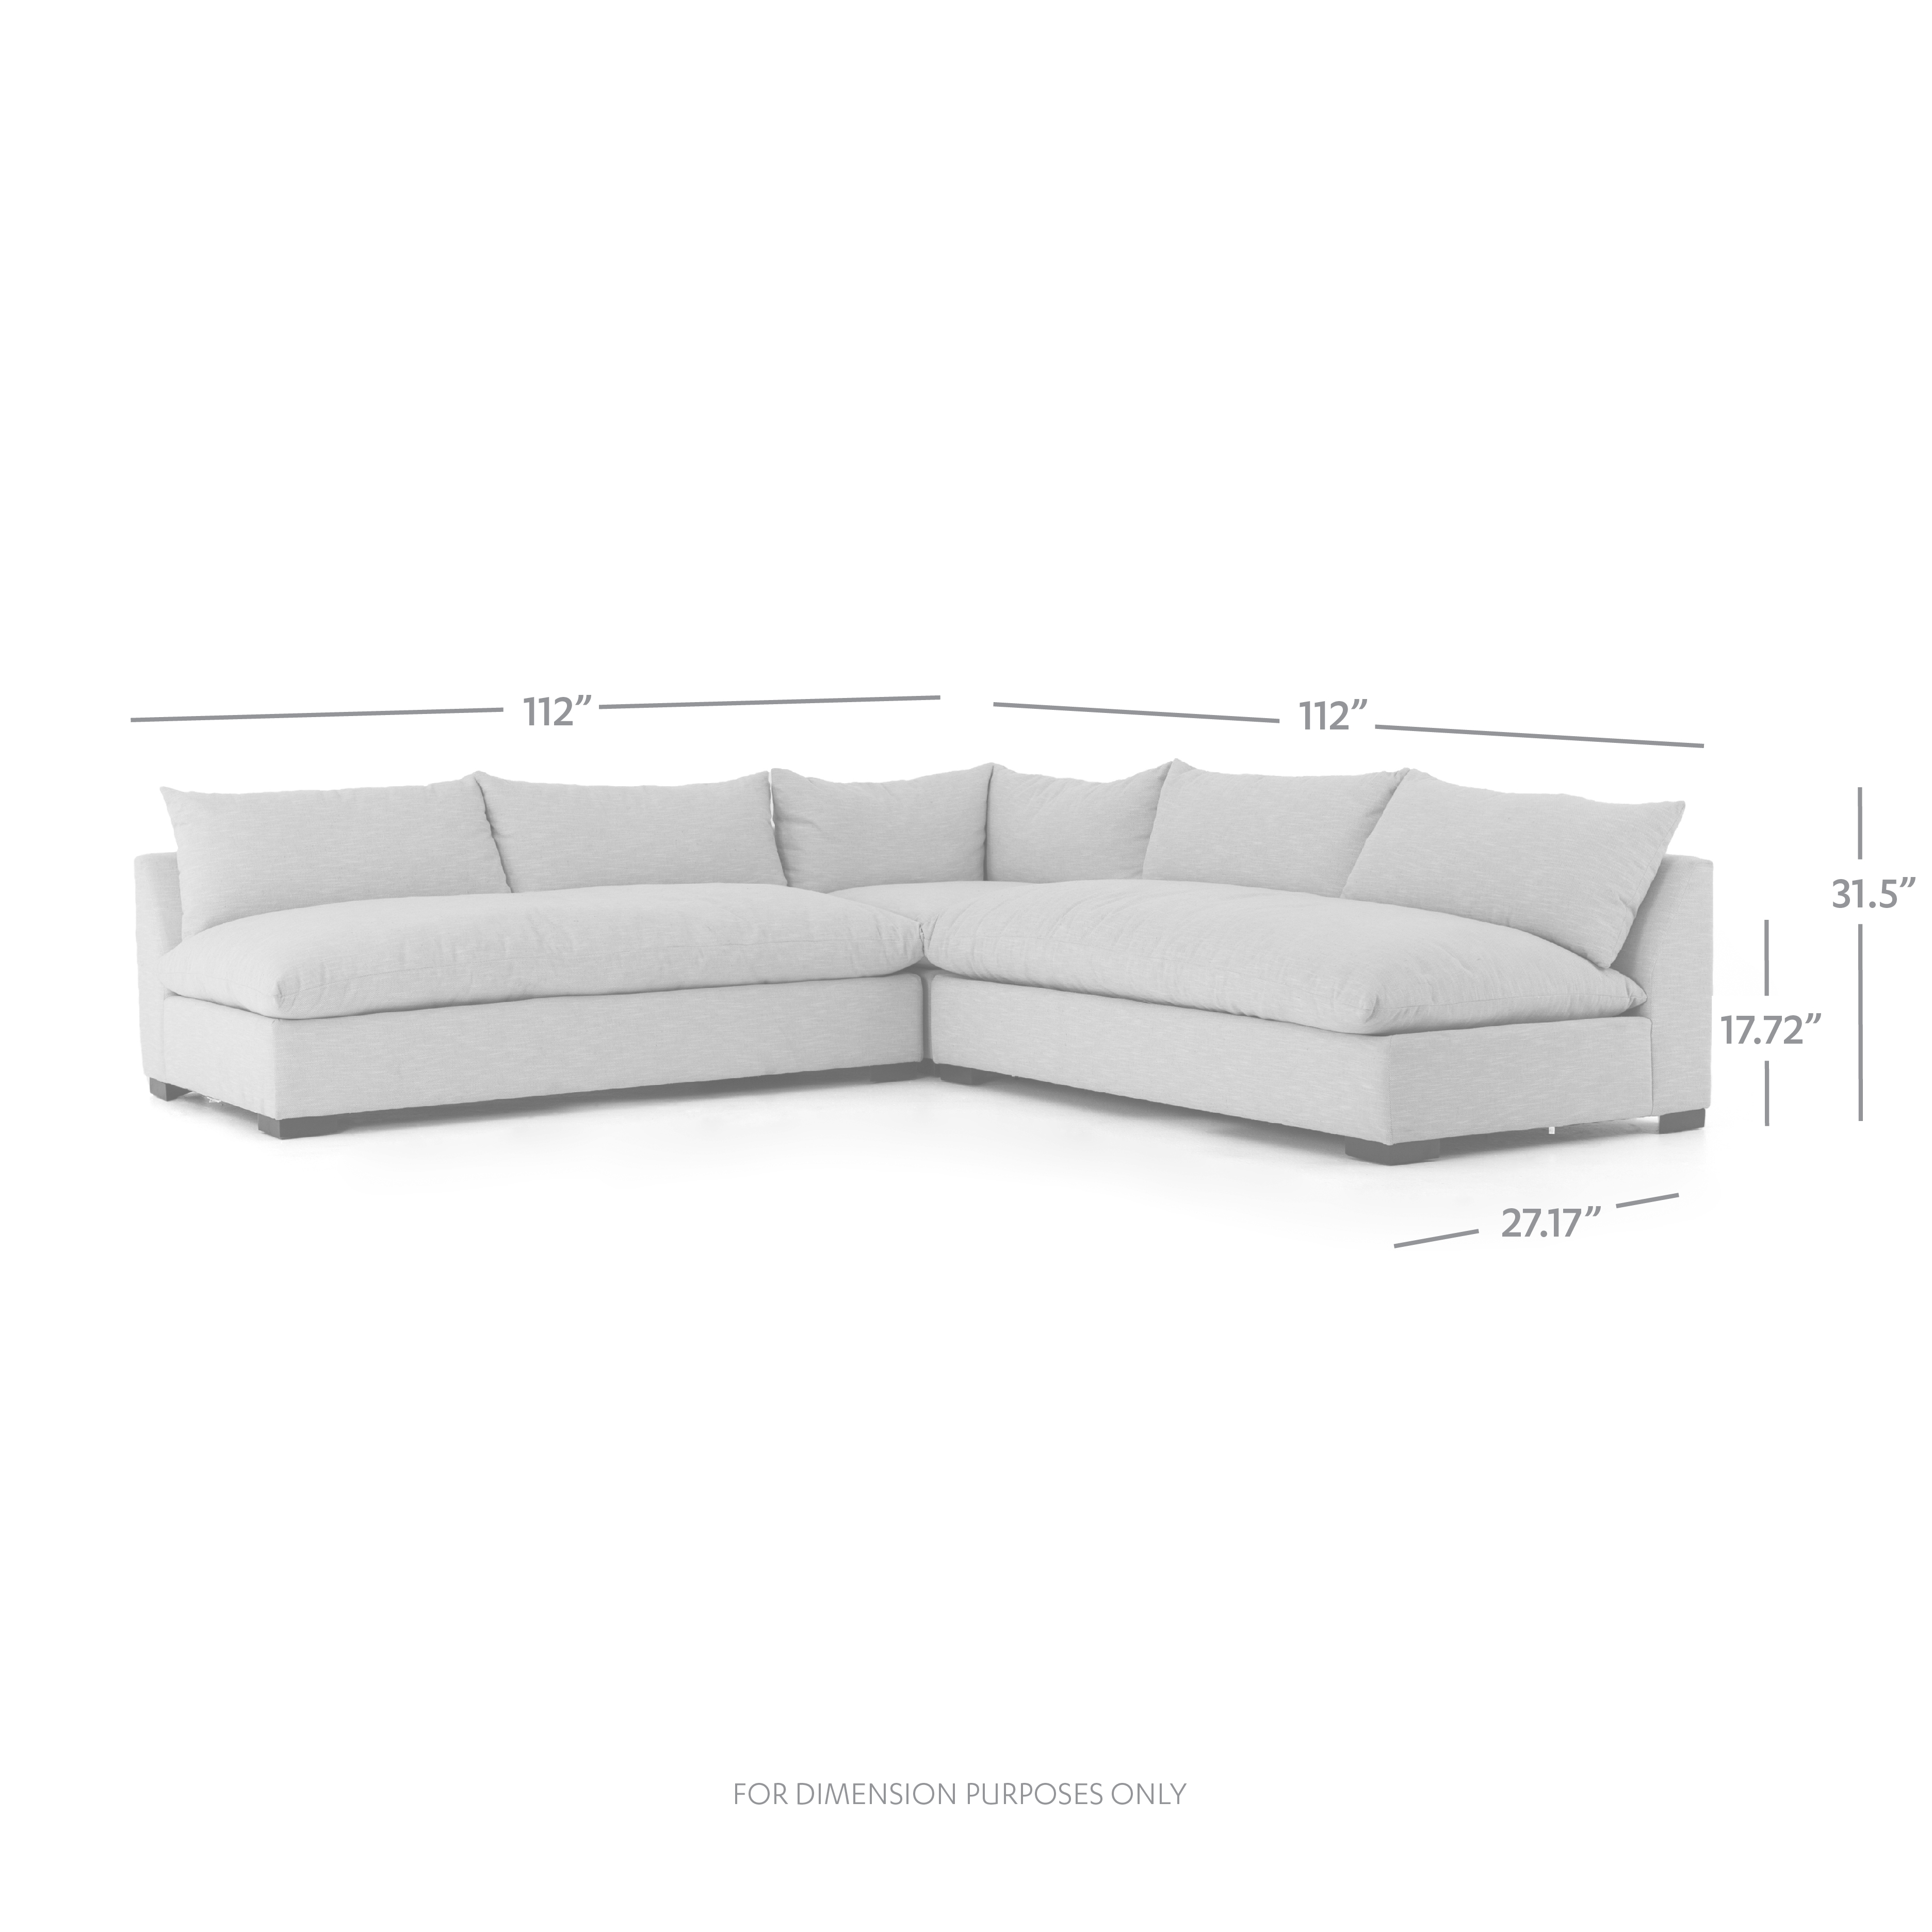 Grant 3-Pc Sectional-Ashby Oatmeal - Image 2